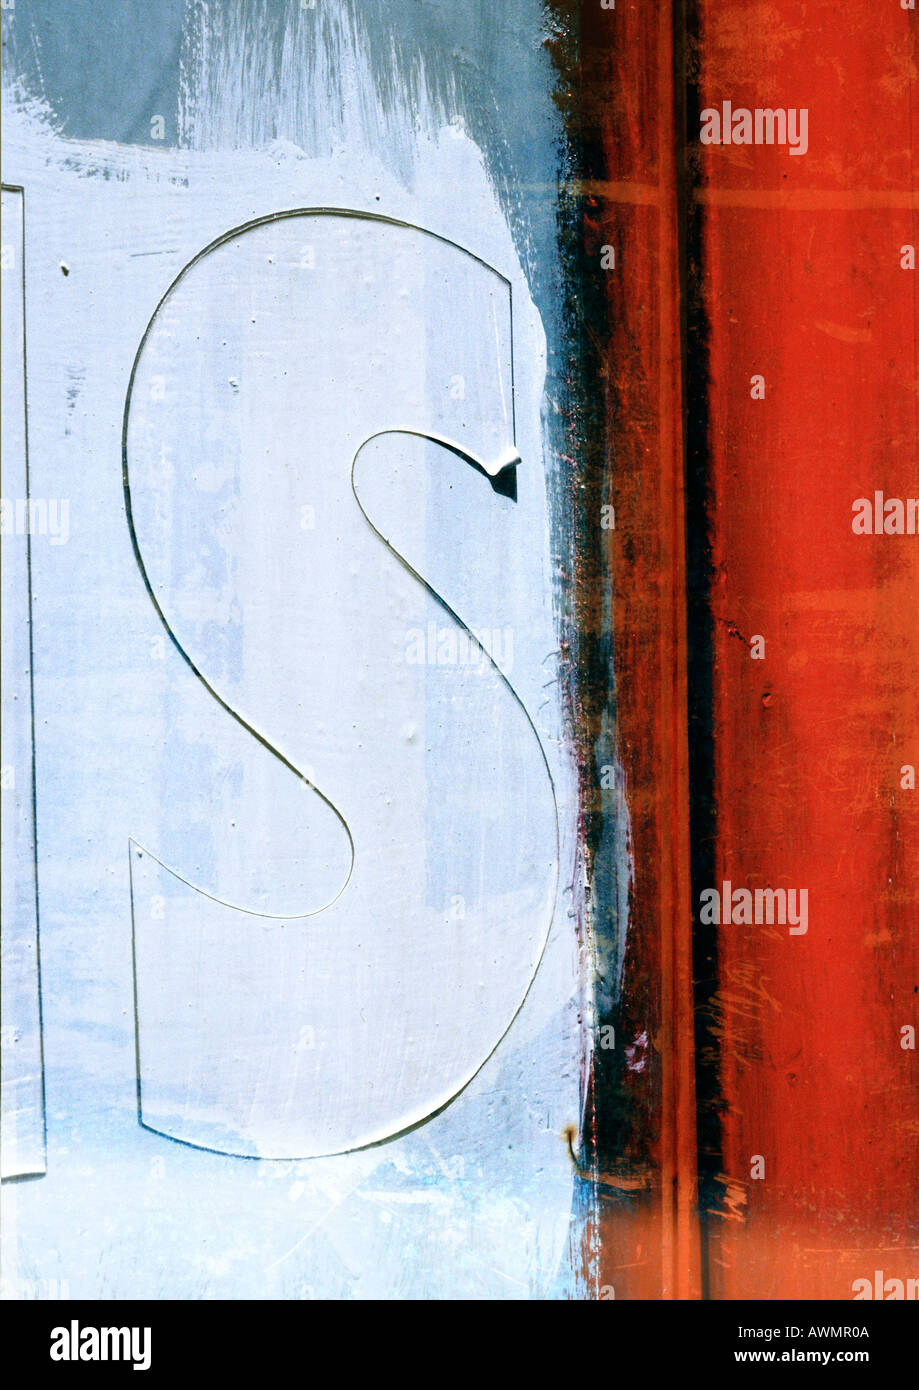 Letter S, close-up Stock Photo